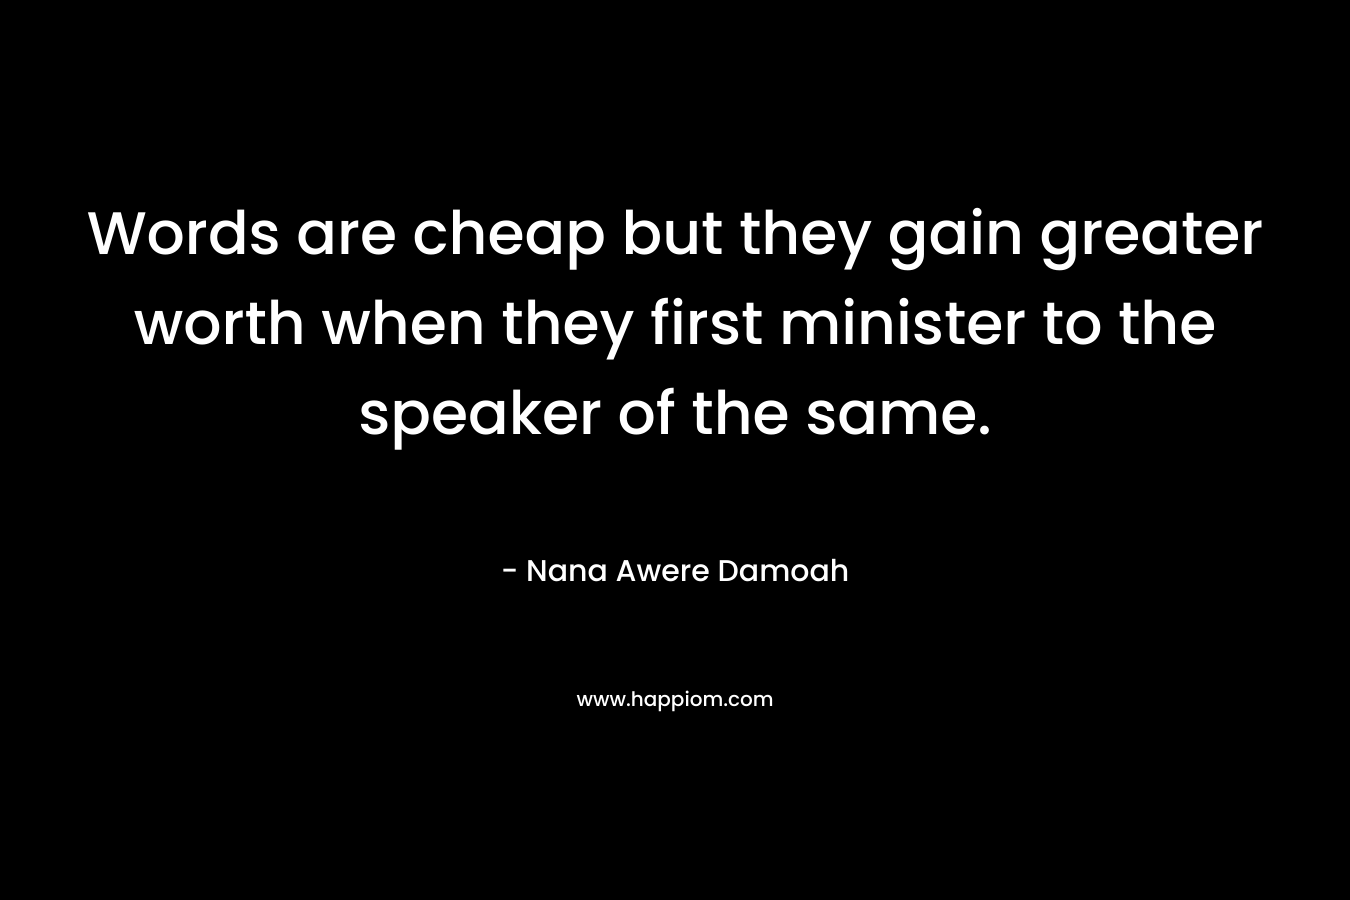 Words are cheap but they gain greater worth when they first minister to the speaker of the same. – Nana Awere Damoah